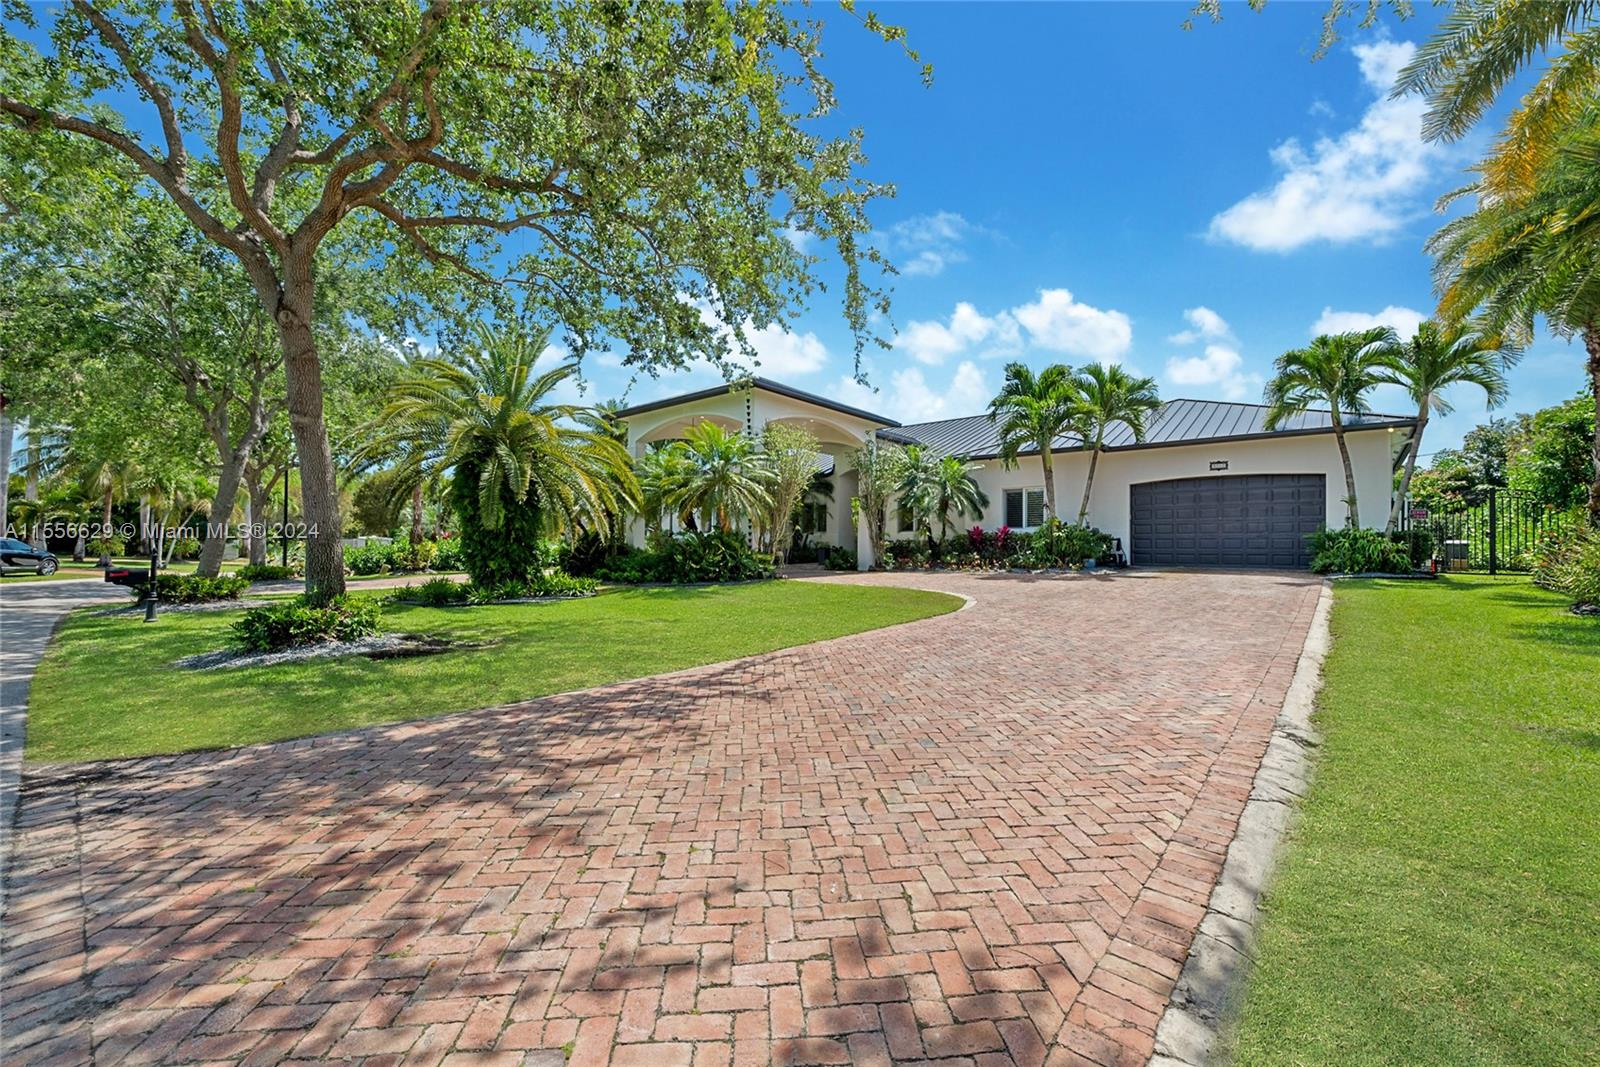 Come discover this captivating 1-story home with 5,319 sf in Palmetto Bay.  Enjoy 5 bedrooms, 1 office, and 5 baths in this modern oasis. Revel in marble floors, a lavish master suite, and a gourmet kitchen. Outdoors, find a fully-equipped gazebo with an outdoor kitchen, custom made coral rock firepit, and pristine pool, perfect for an entertaining lifestyle. Updated in 2021 with a new roof, A/C, and freshly painted exterior. In addition this home includes plantation shutters, impact windows & California closets throughout. Located on a quiet desirable street, near top private schools such as Palmer Trinity and Westminster Christian, and beautiful parks, this home offers a perfect blend of luxury and convenience. Your dream Palmetto Bay lifestyle awaits!